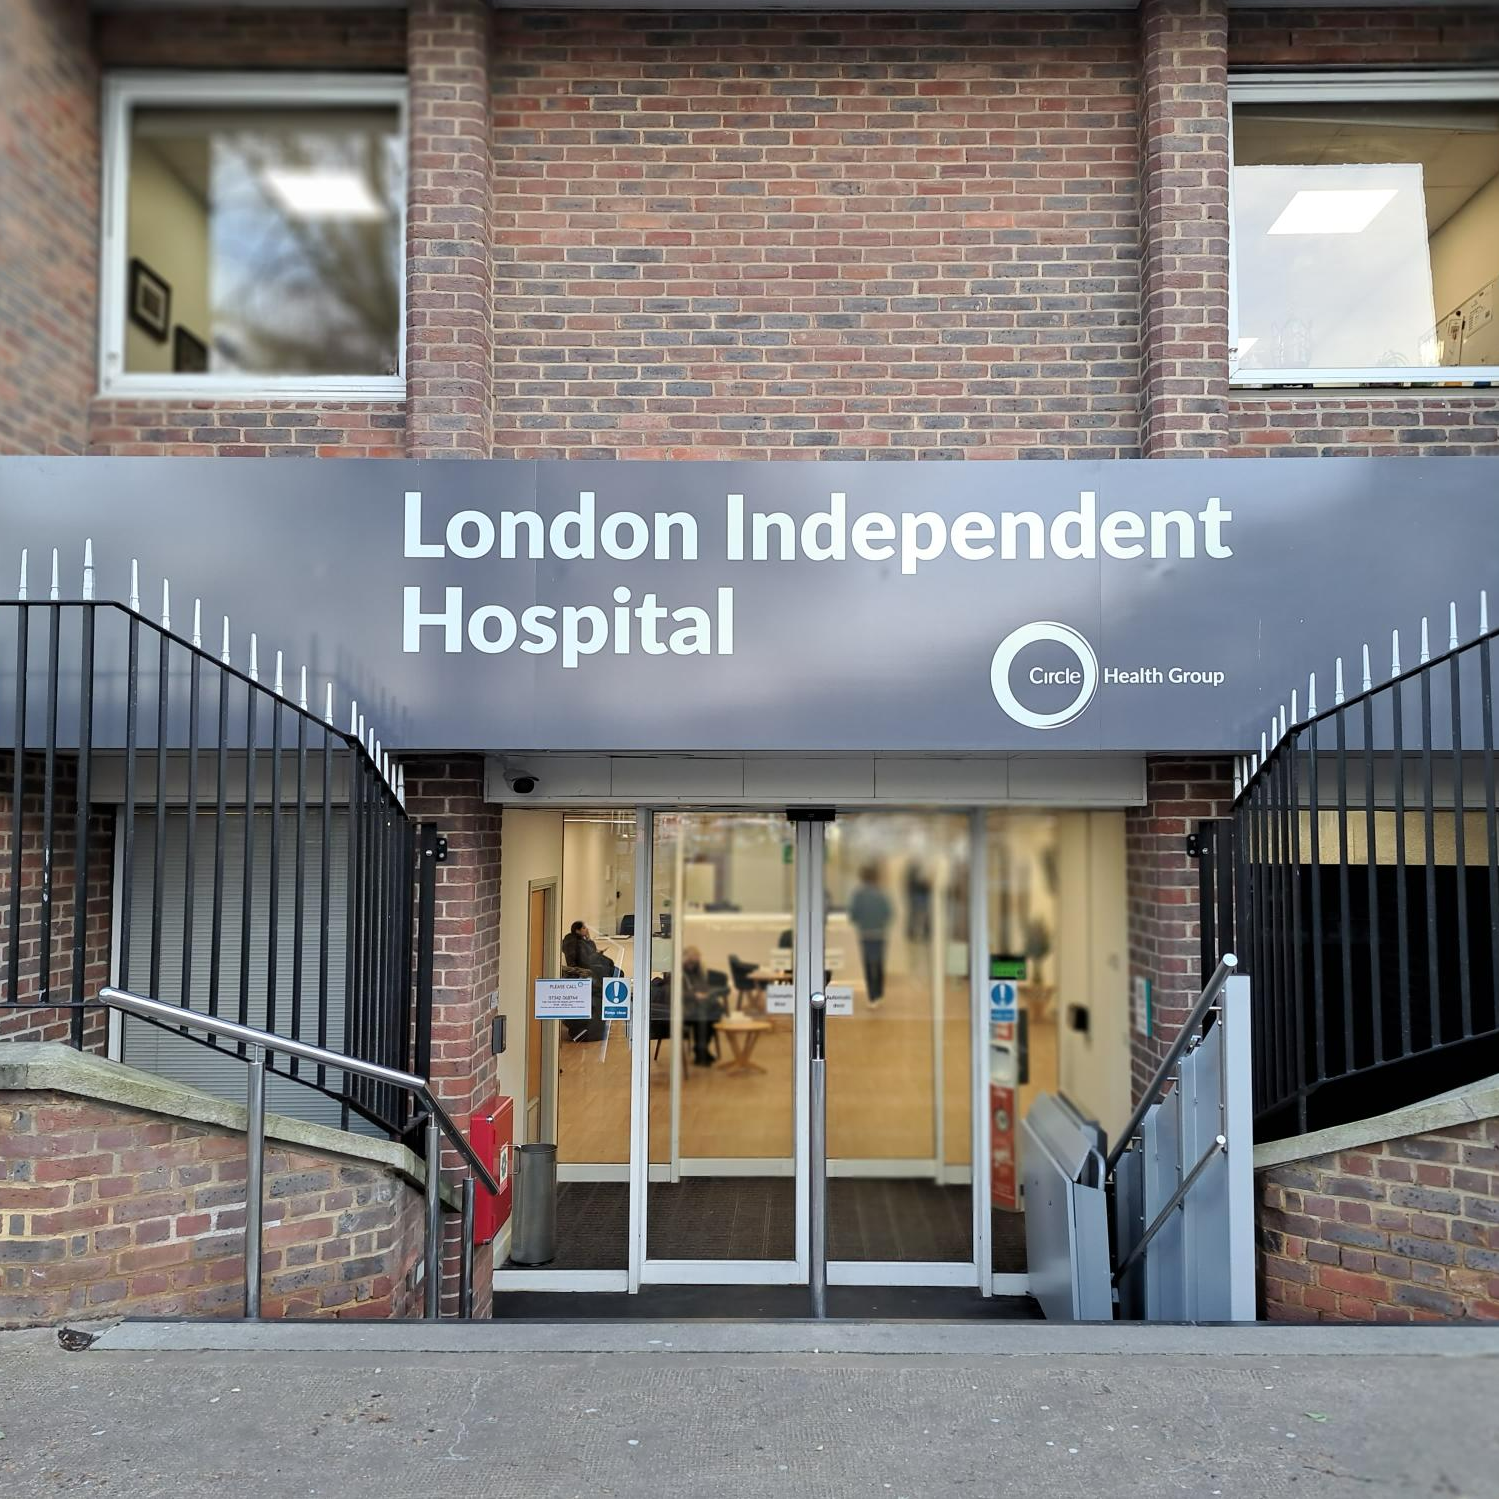 The London Independent Hospital (part of Circle Health Group)